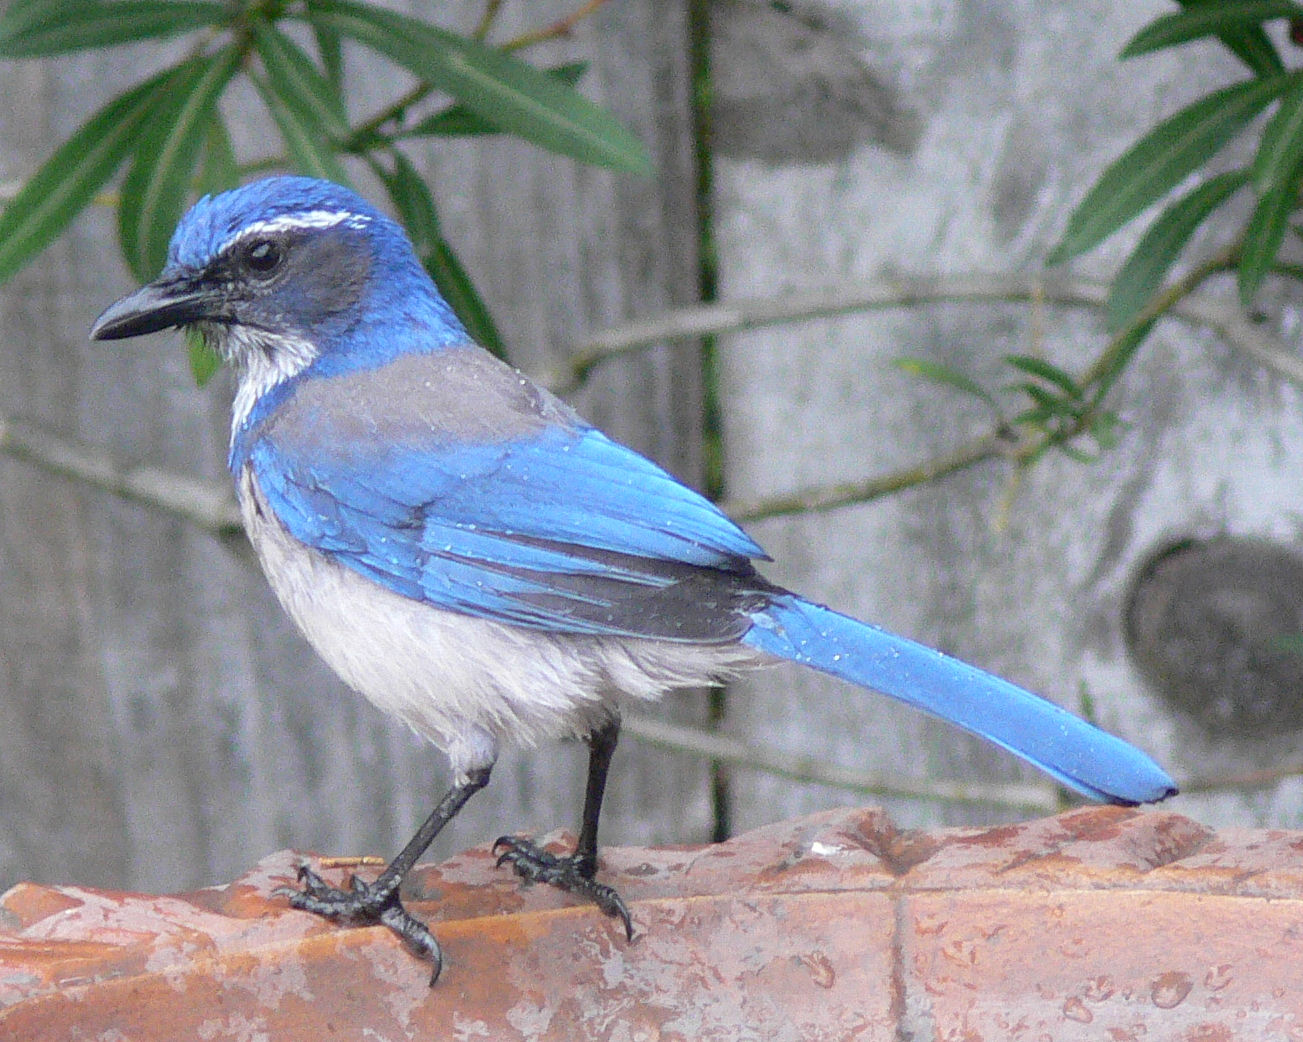 Scrub Jay after a bird bath Photo by Jessica Merz used with permision from wikicommons